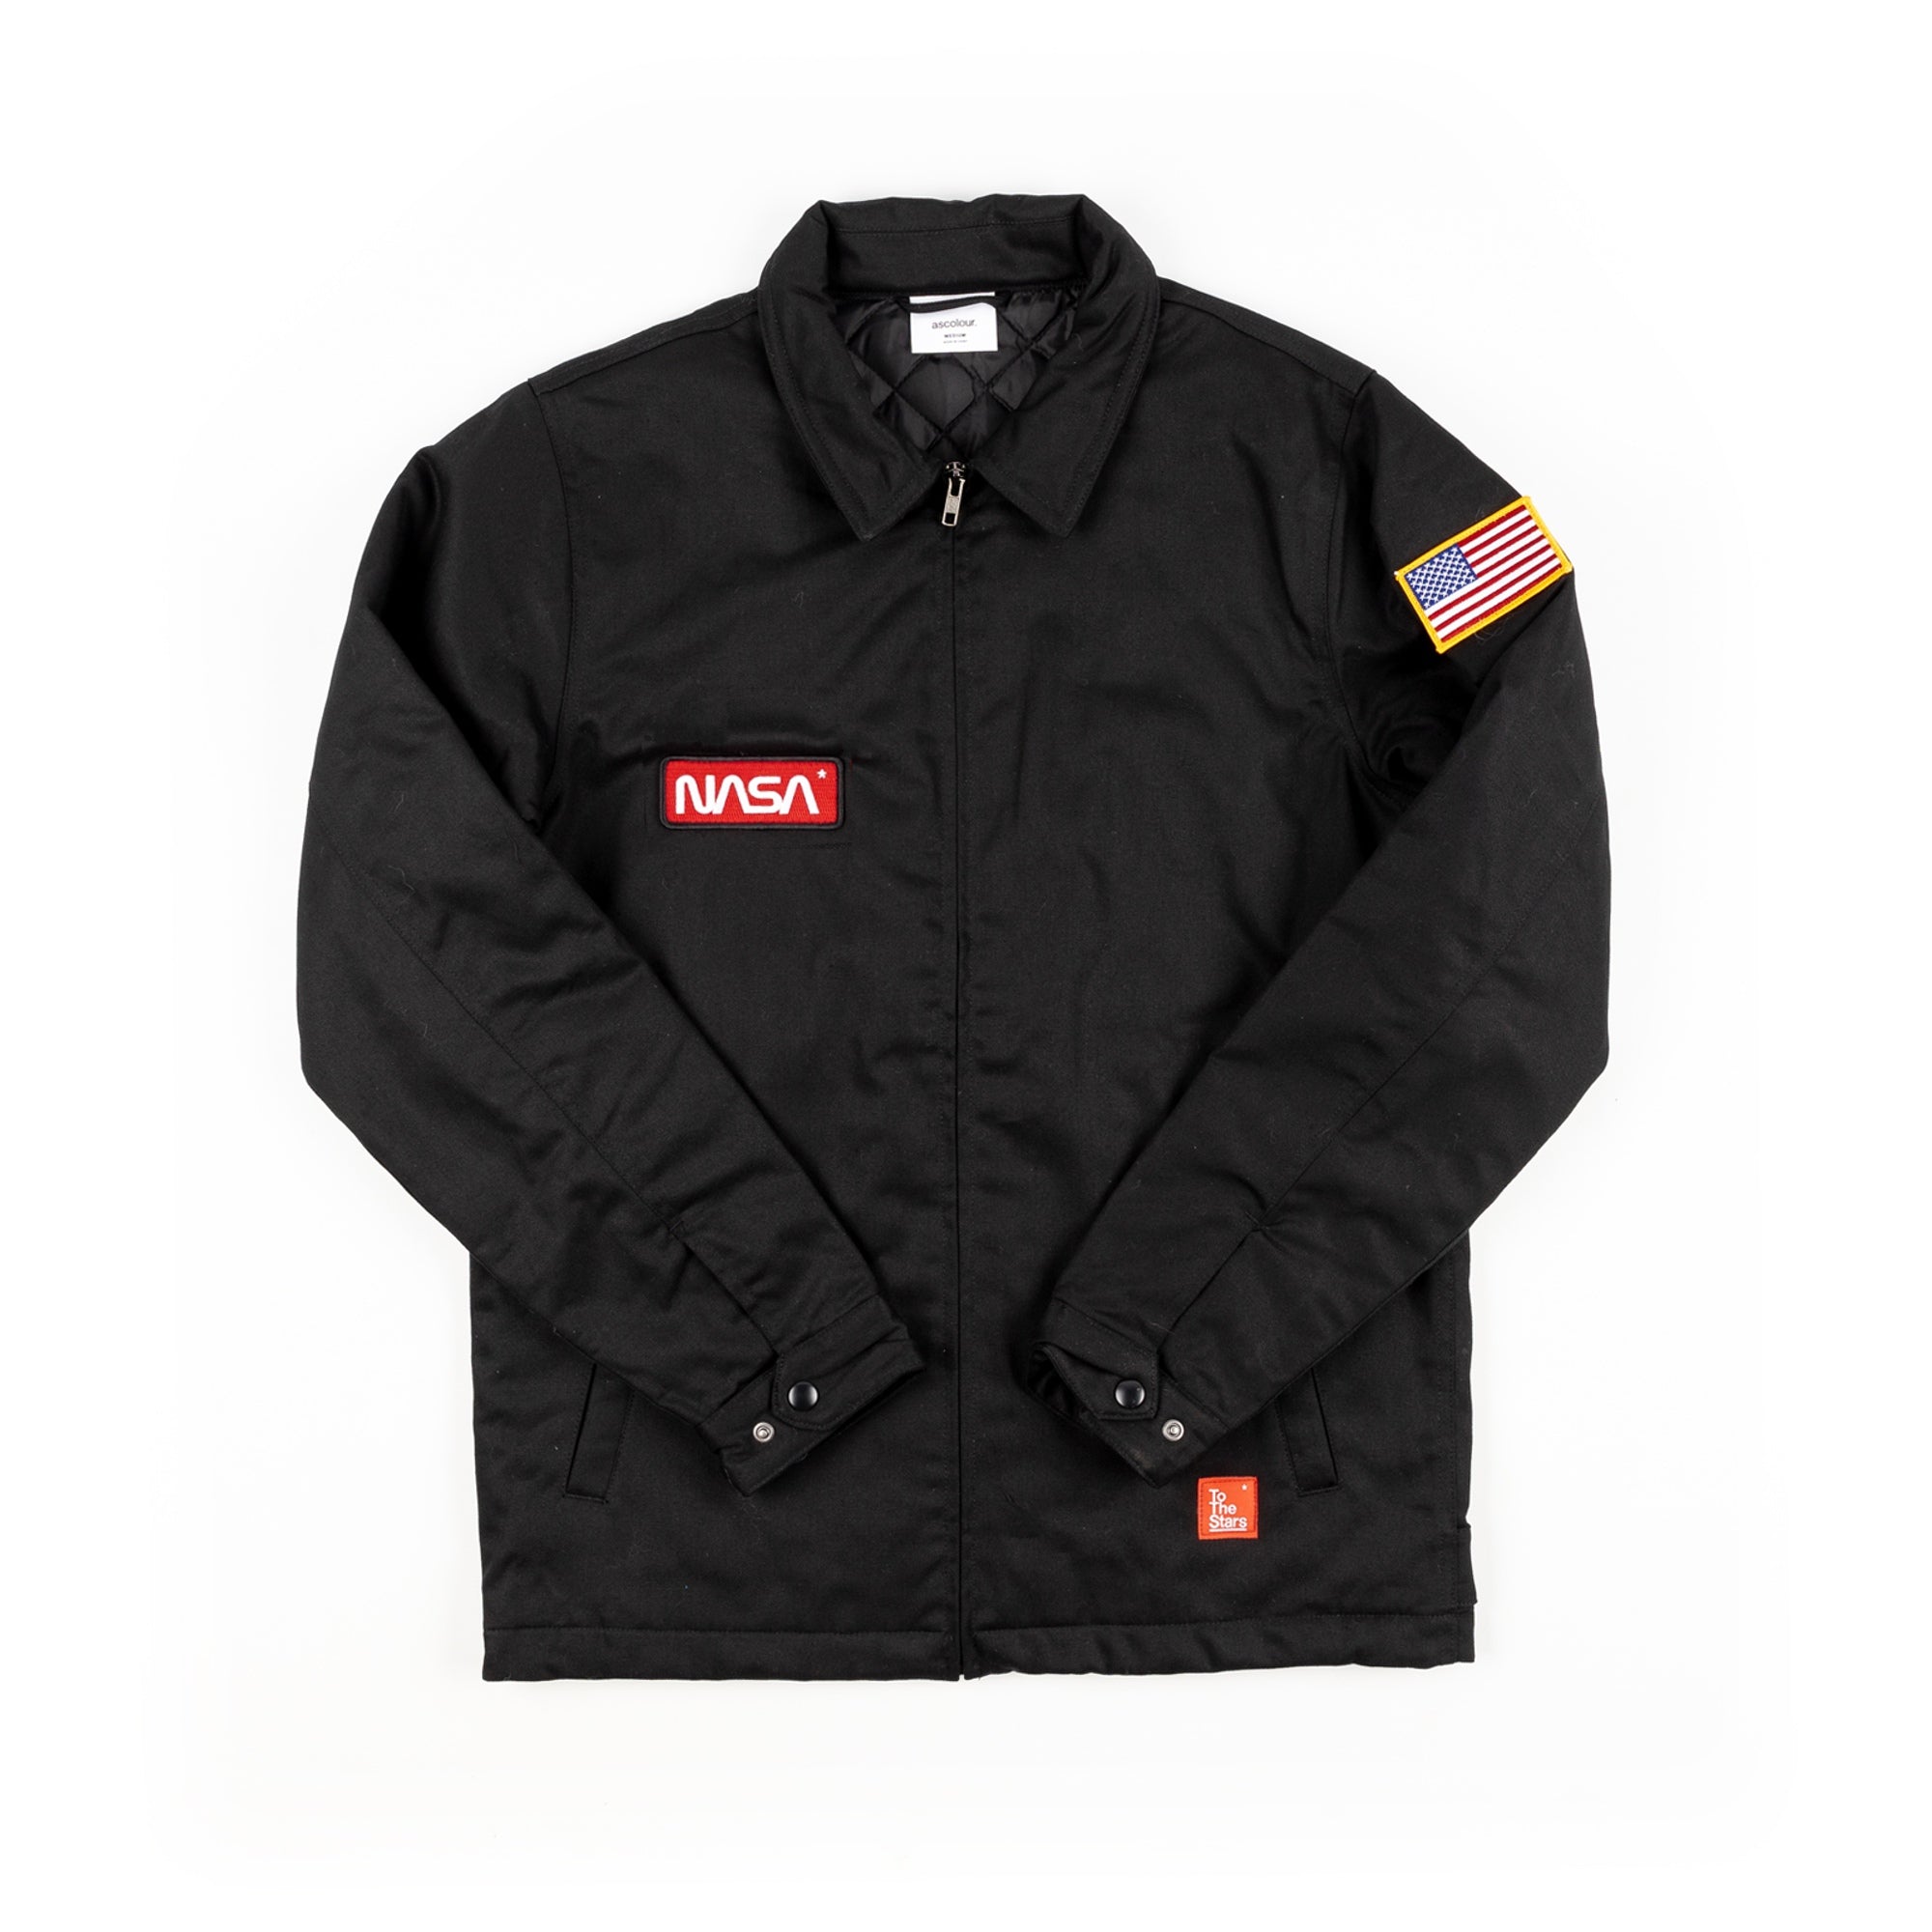 To The Stars* x NASA Worm Logo Red Patch Jacket Black